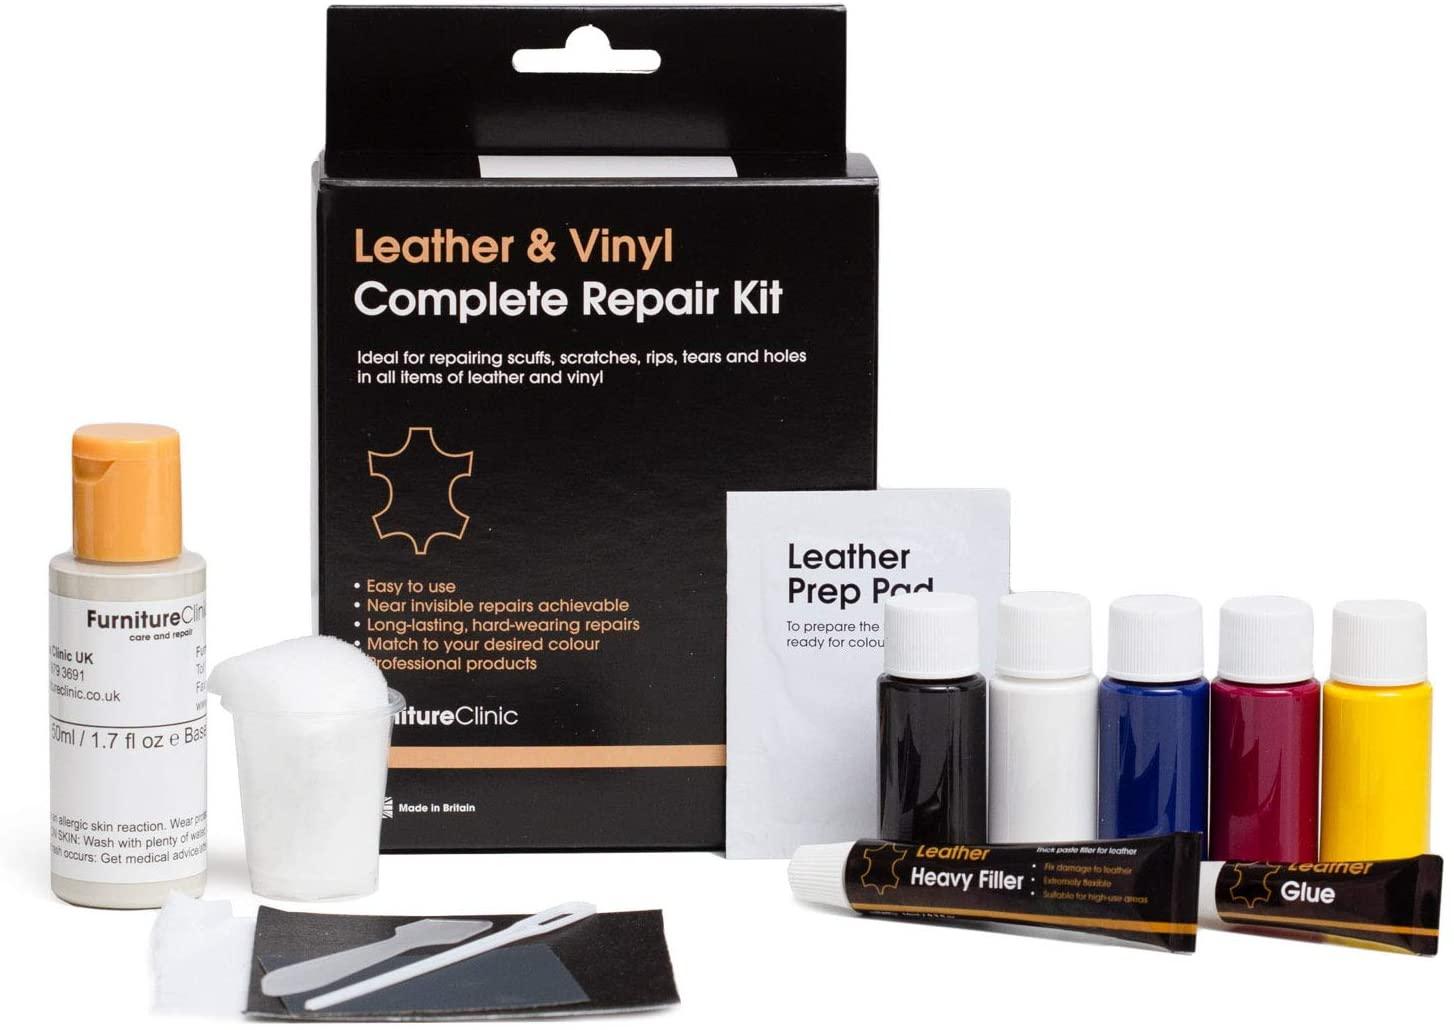 Furniture Clinic Complete Leather Repair Kit (Red) -12 Colour Options for Sofas, Car Seats - Matches All Shades of Leather - Patch, Fill & Touch up Scratches, tears and Other Damaged Areas: